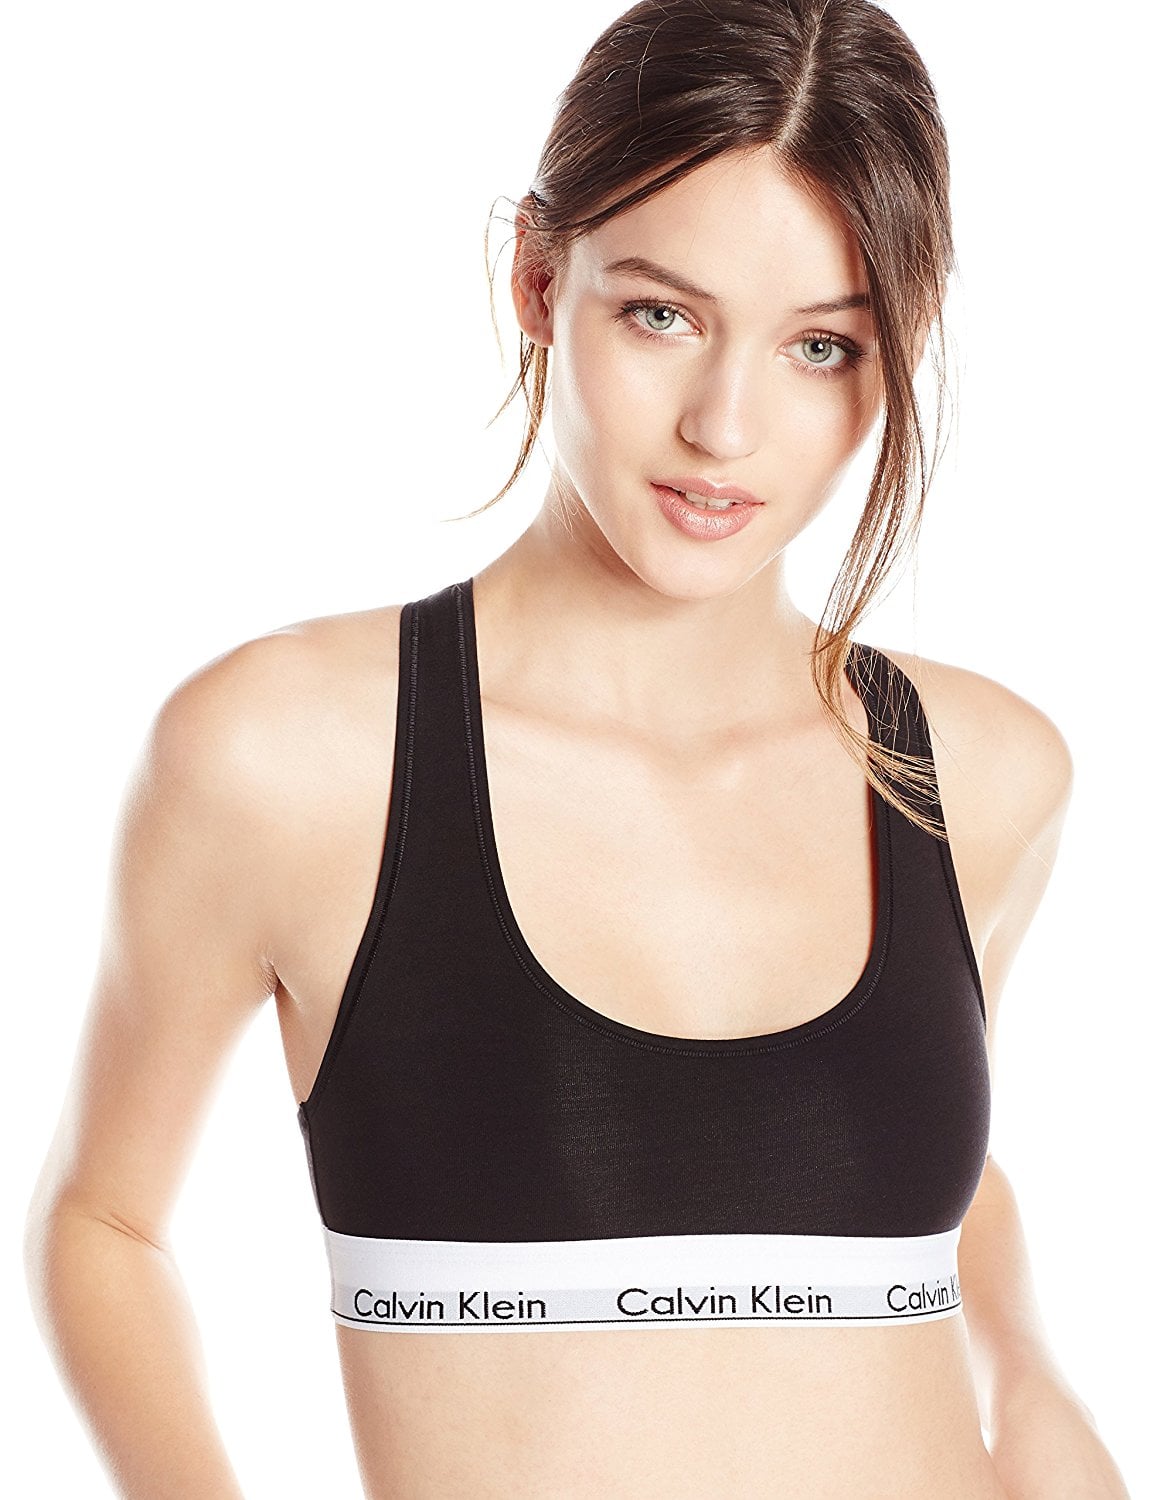 The Calvin Klein Sports Bra Or How To Be Sexy And Sporty?